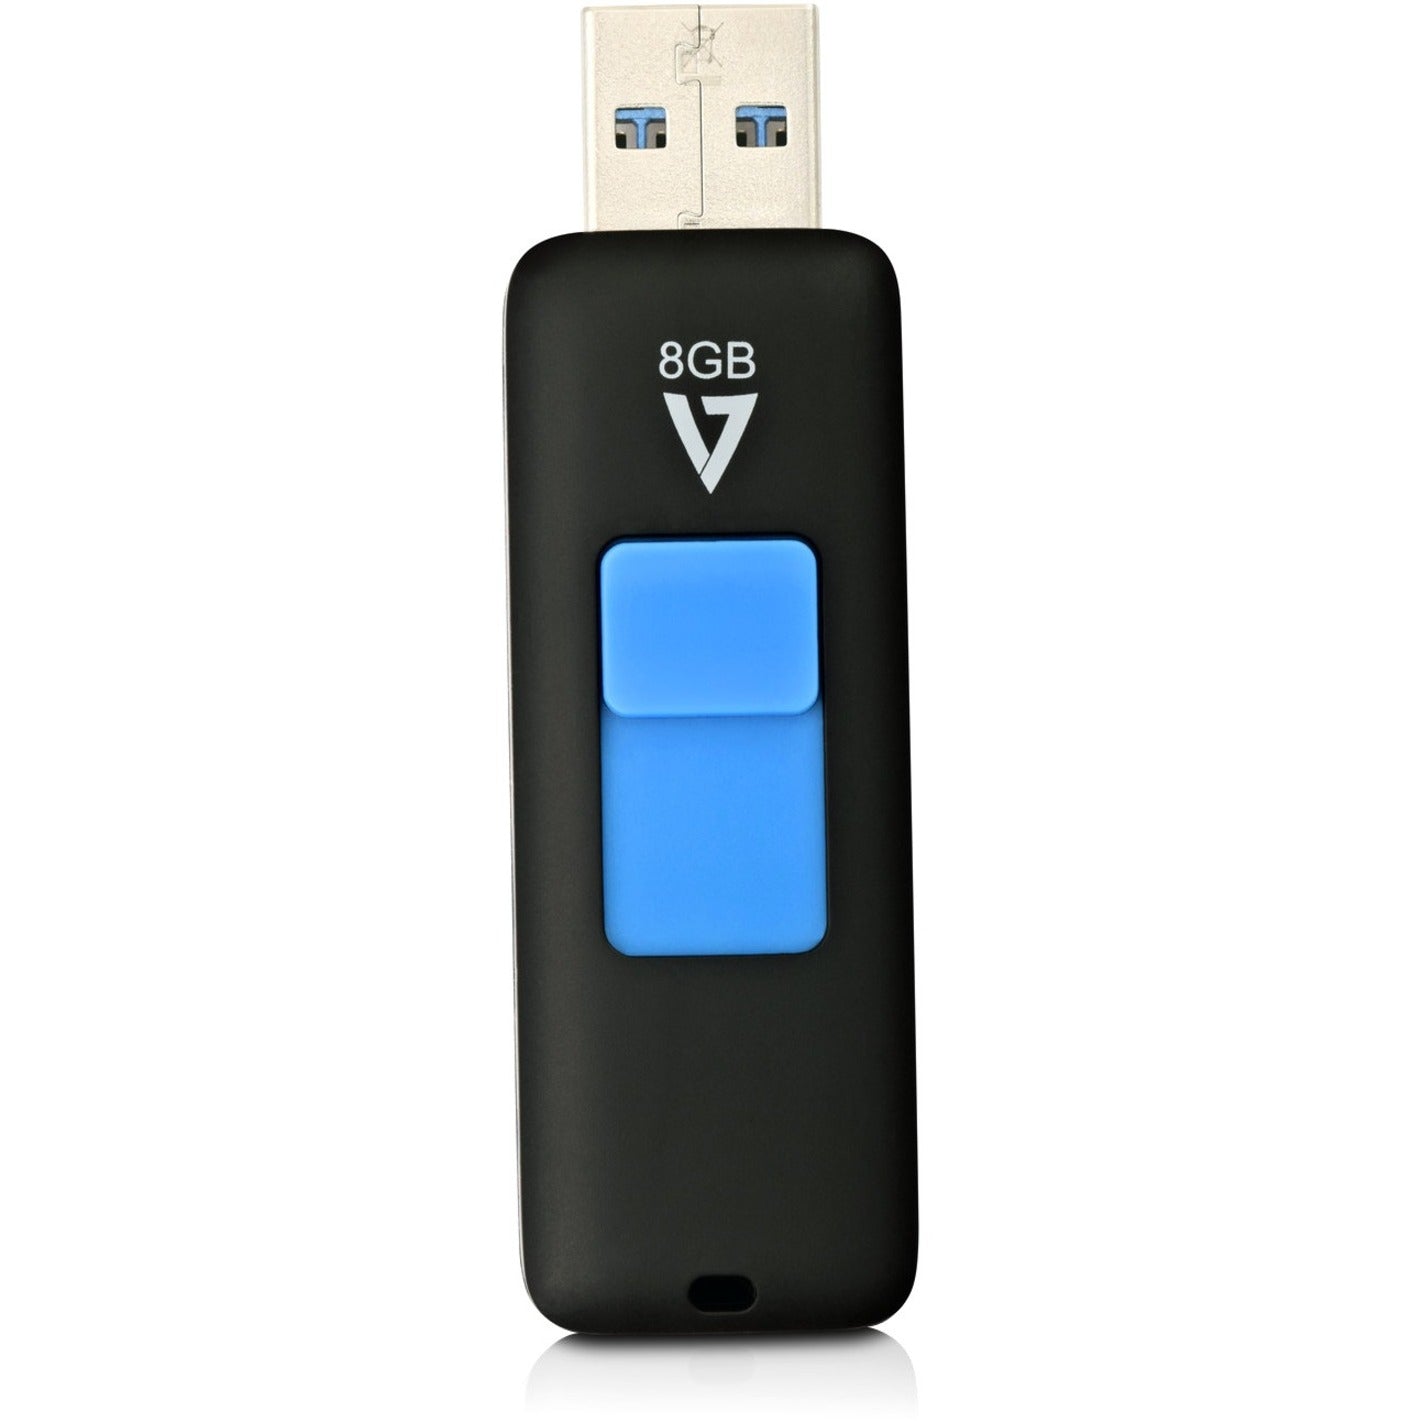 V7 VF38GAR-3N 8GB USB 3.0 Flash Drive - With Retractable USB connector, 5 Year Limited Warranty, RoHS Certified